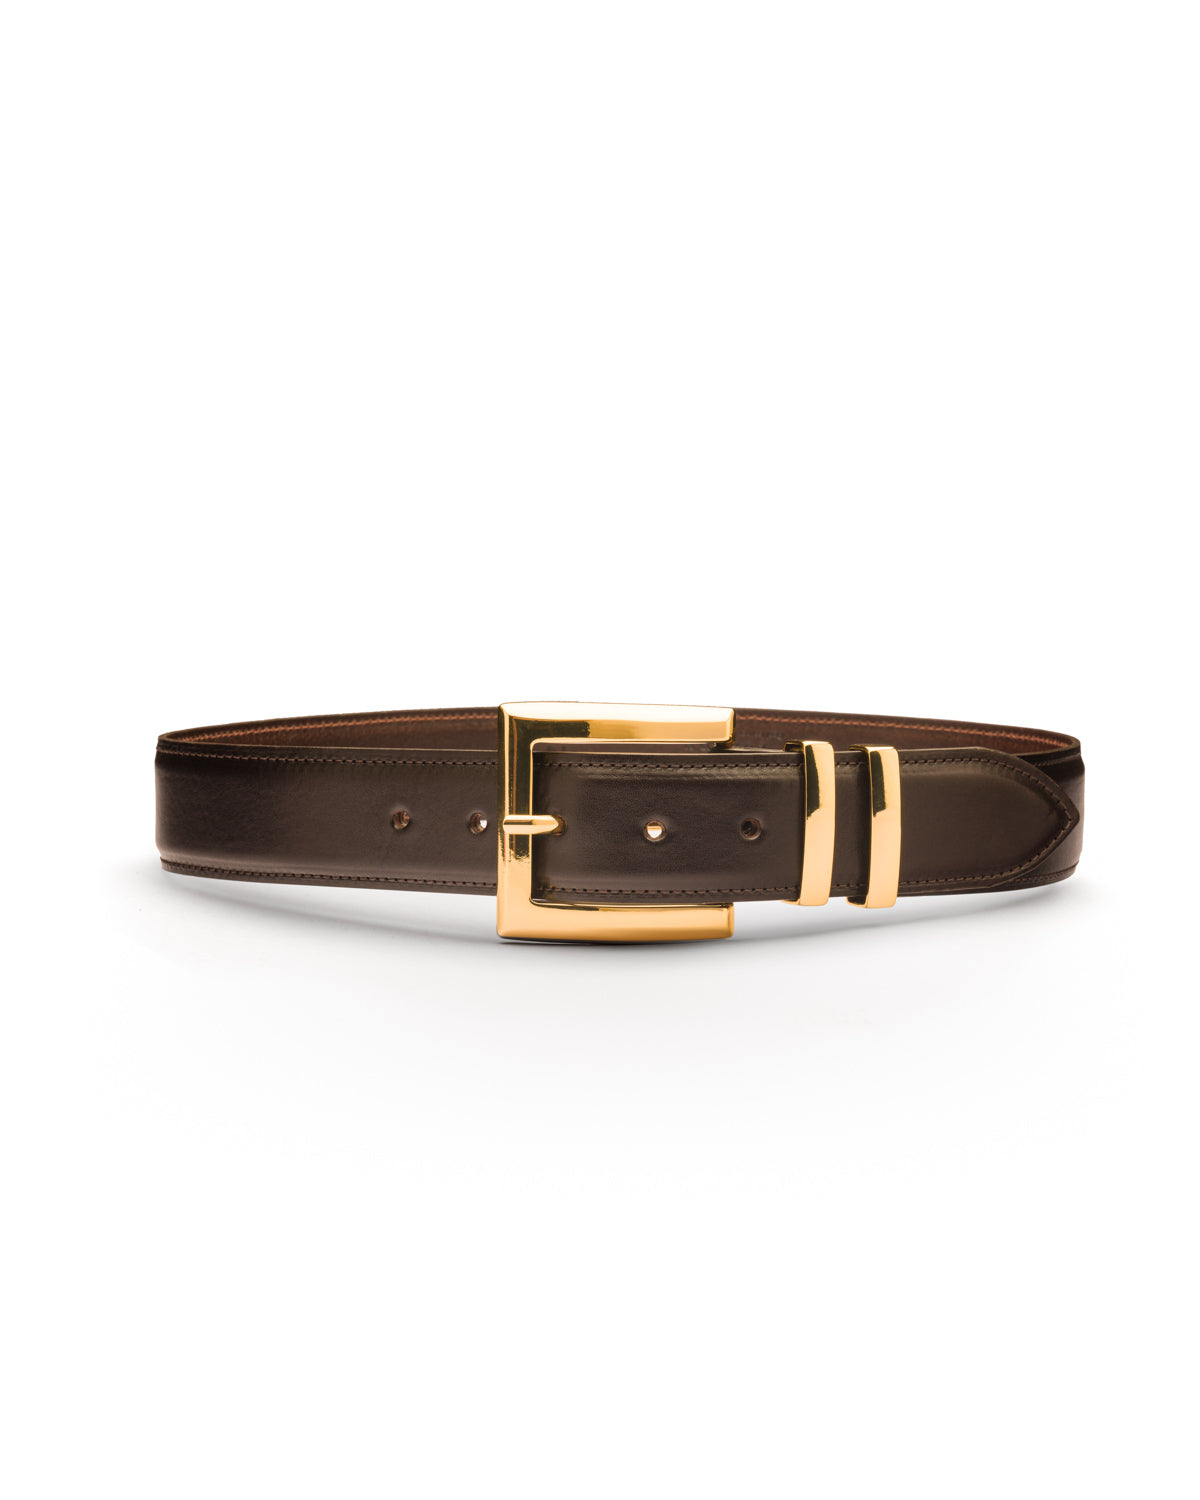 Naomi brown leather belt with gold buckle